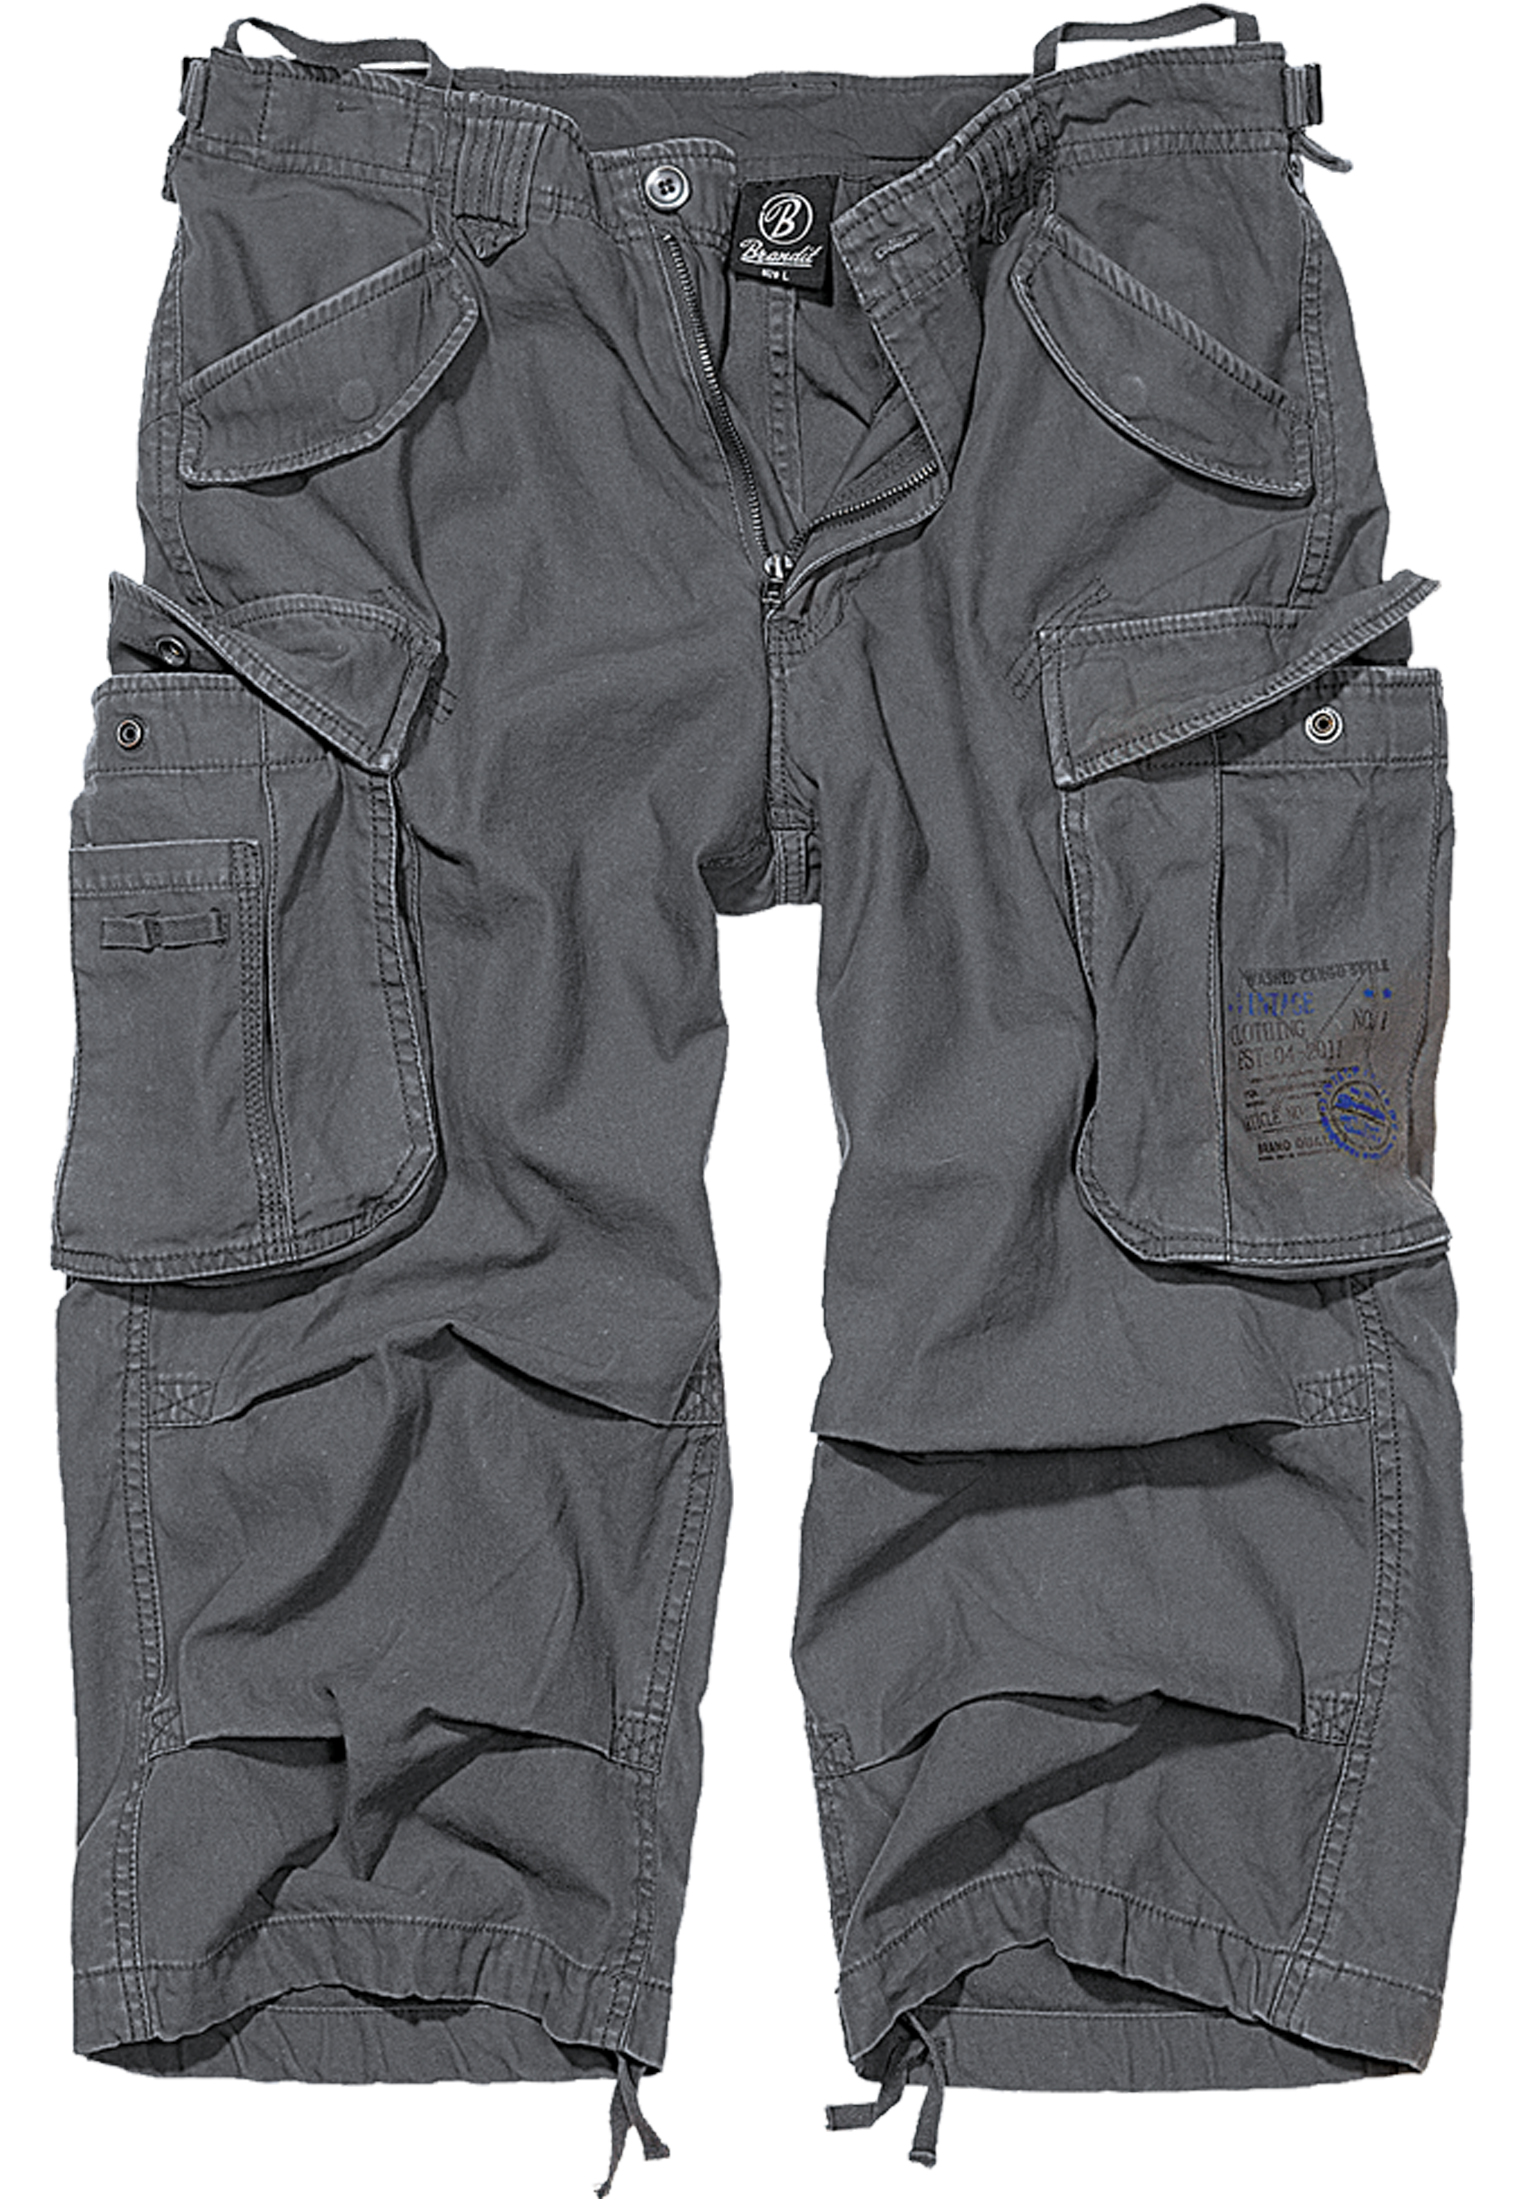 Industry Vintage Cargo 3/4 Charcoal Shorts